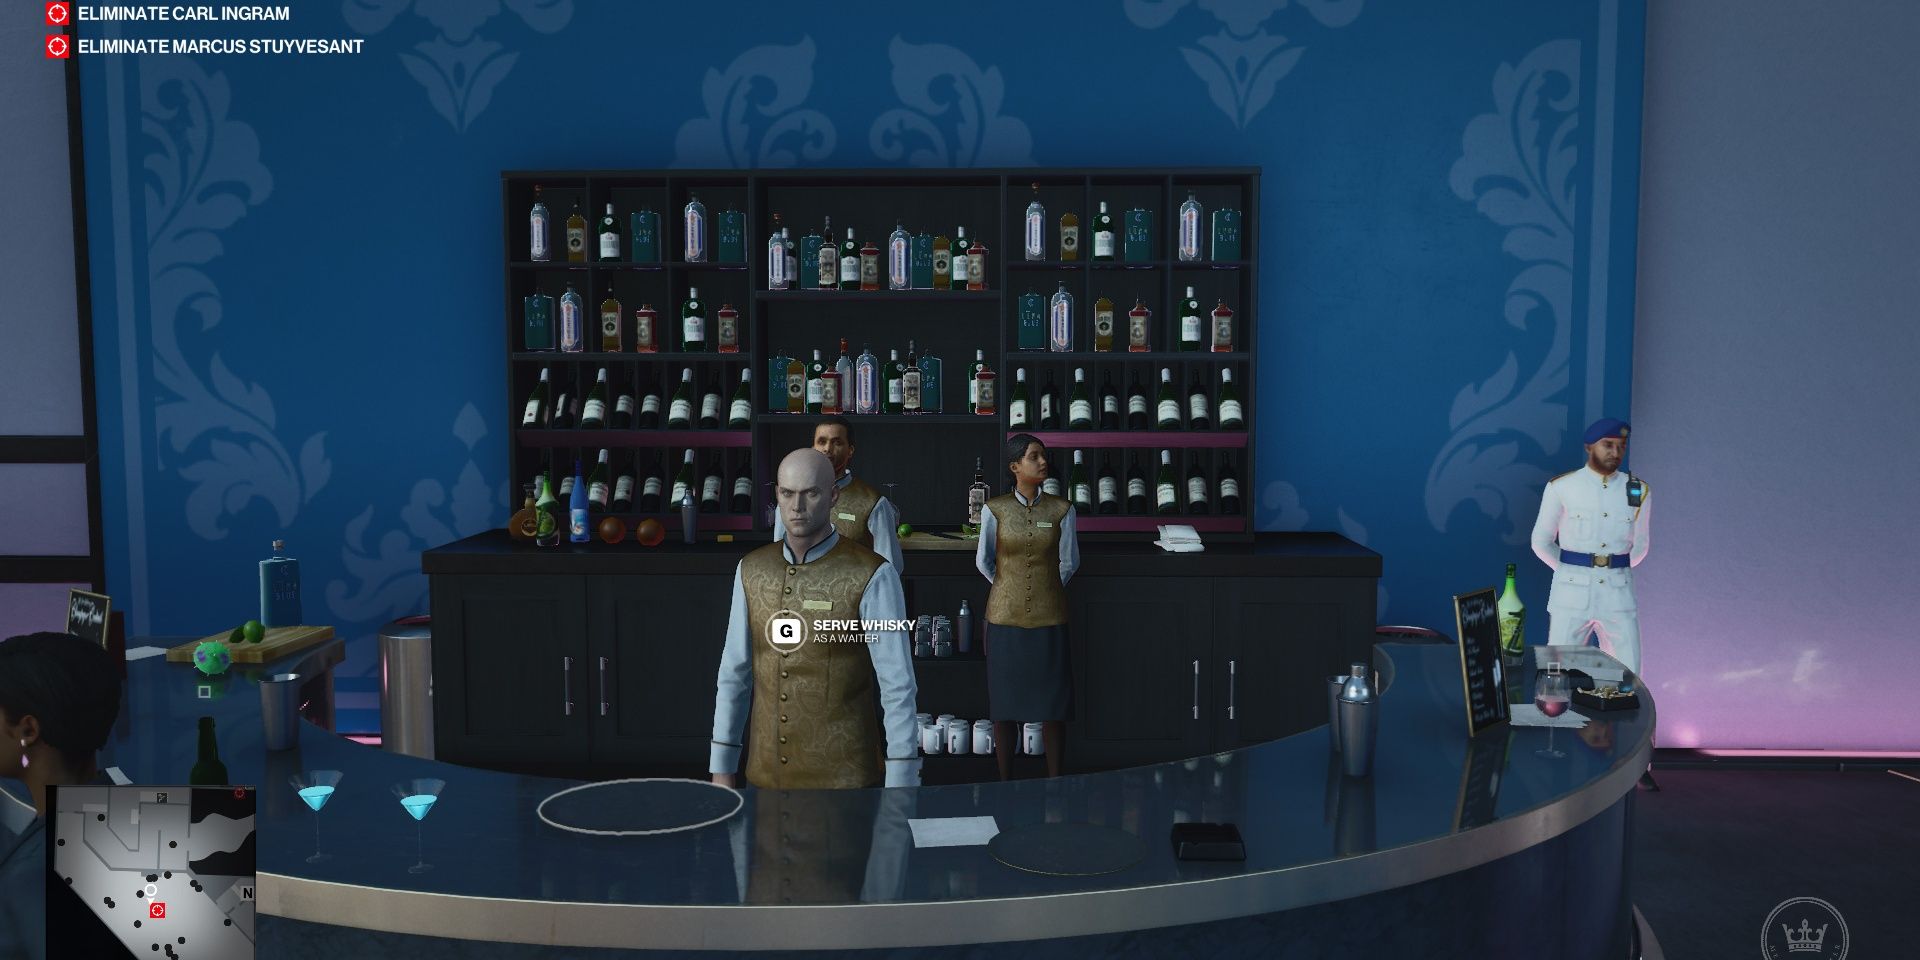 An image of Agent 47 in disguise as a bartender